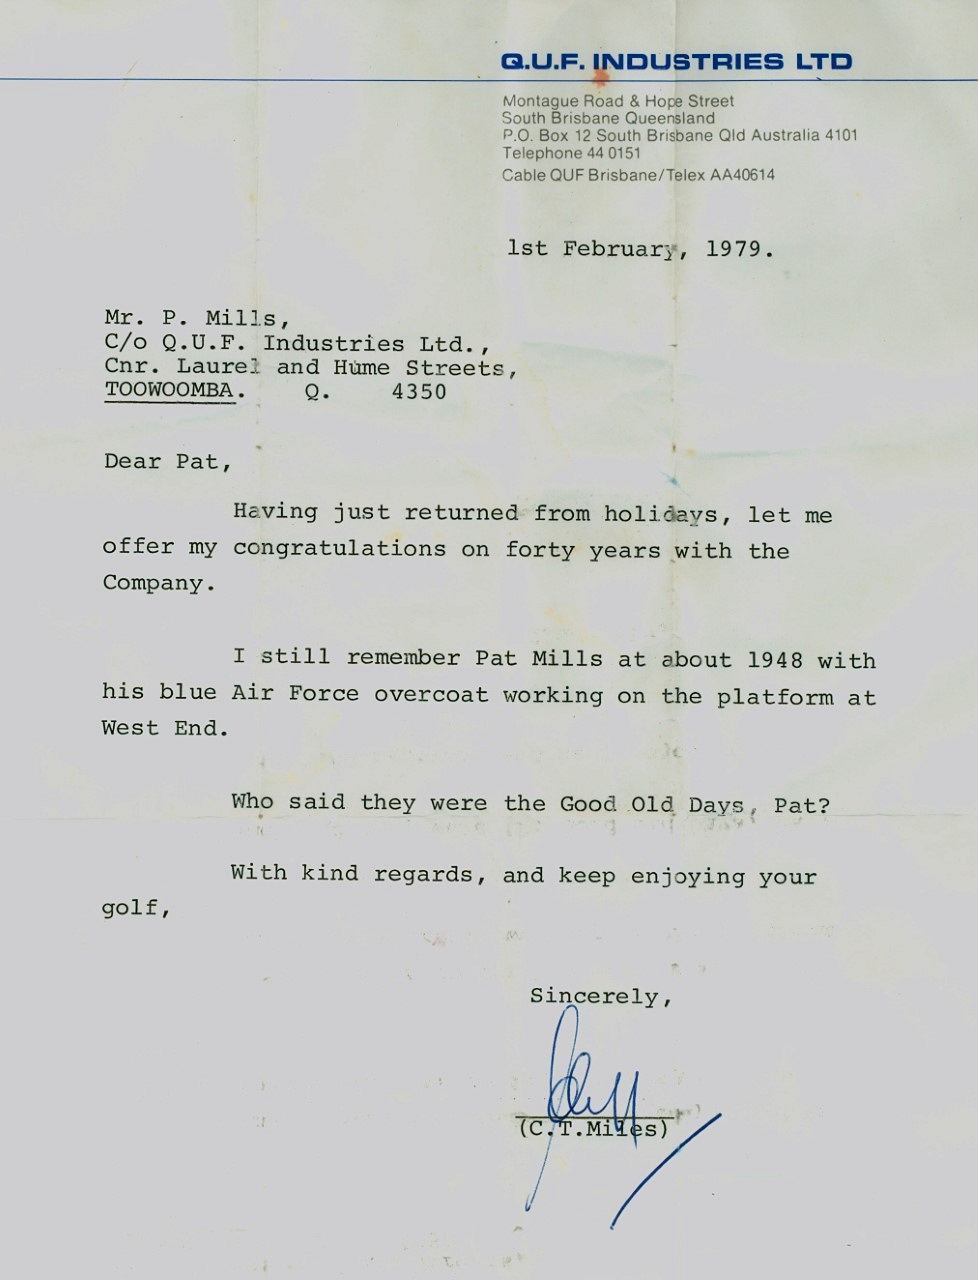 Letter to Pat Mills, congratulating him on 40 years employment at Peters Ice Cream Factory signed by C.T.Miles